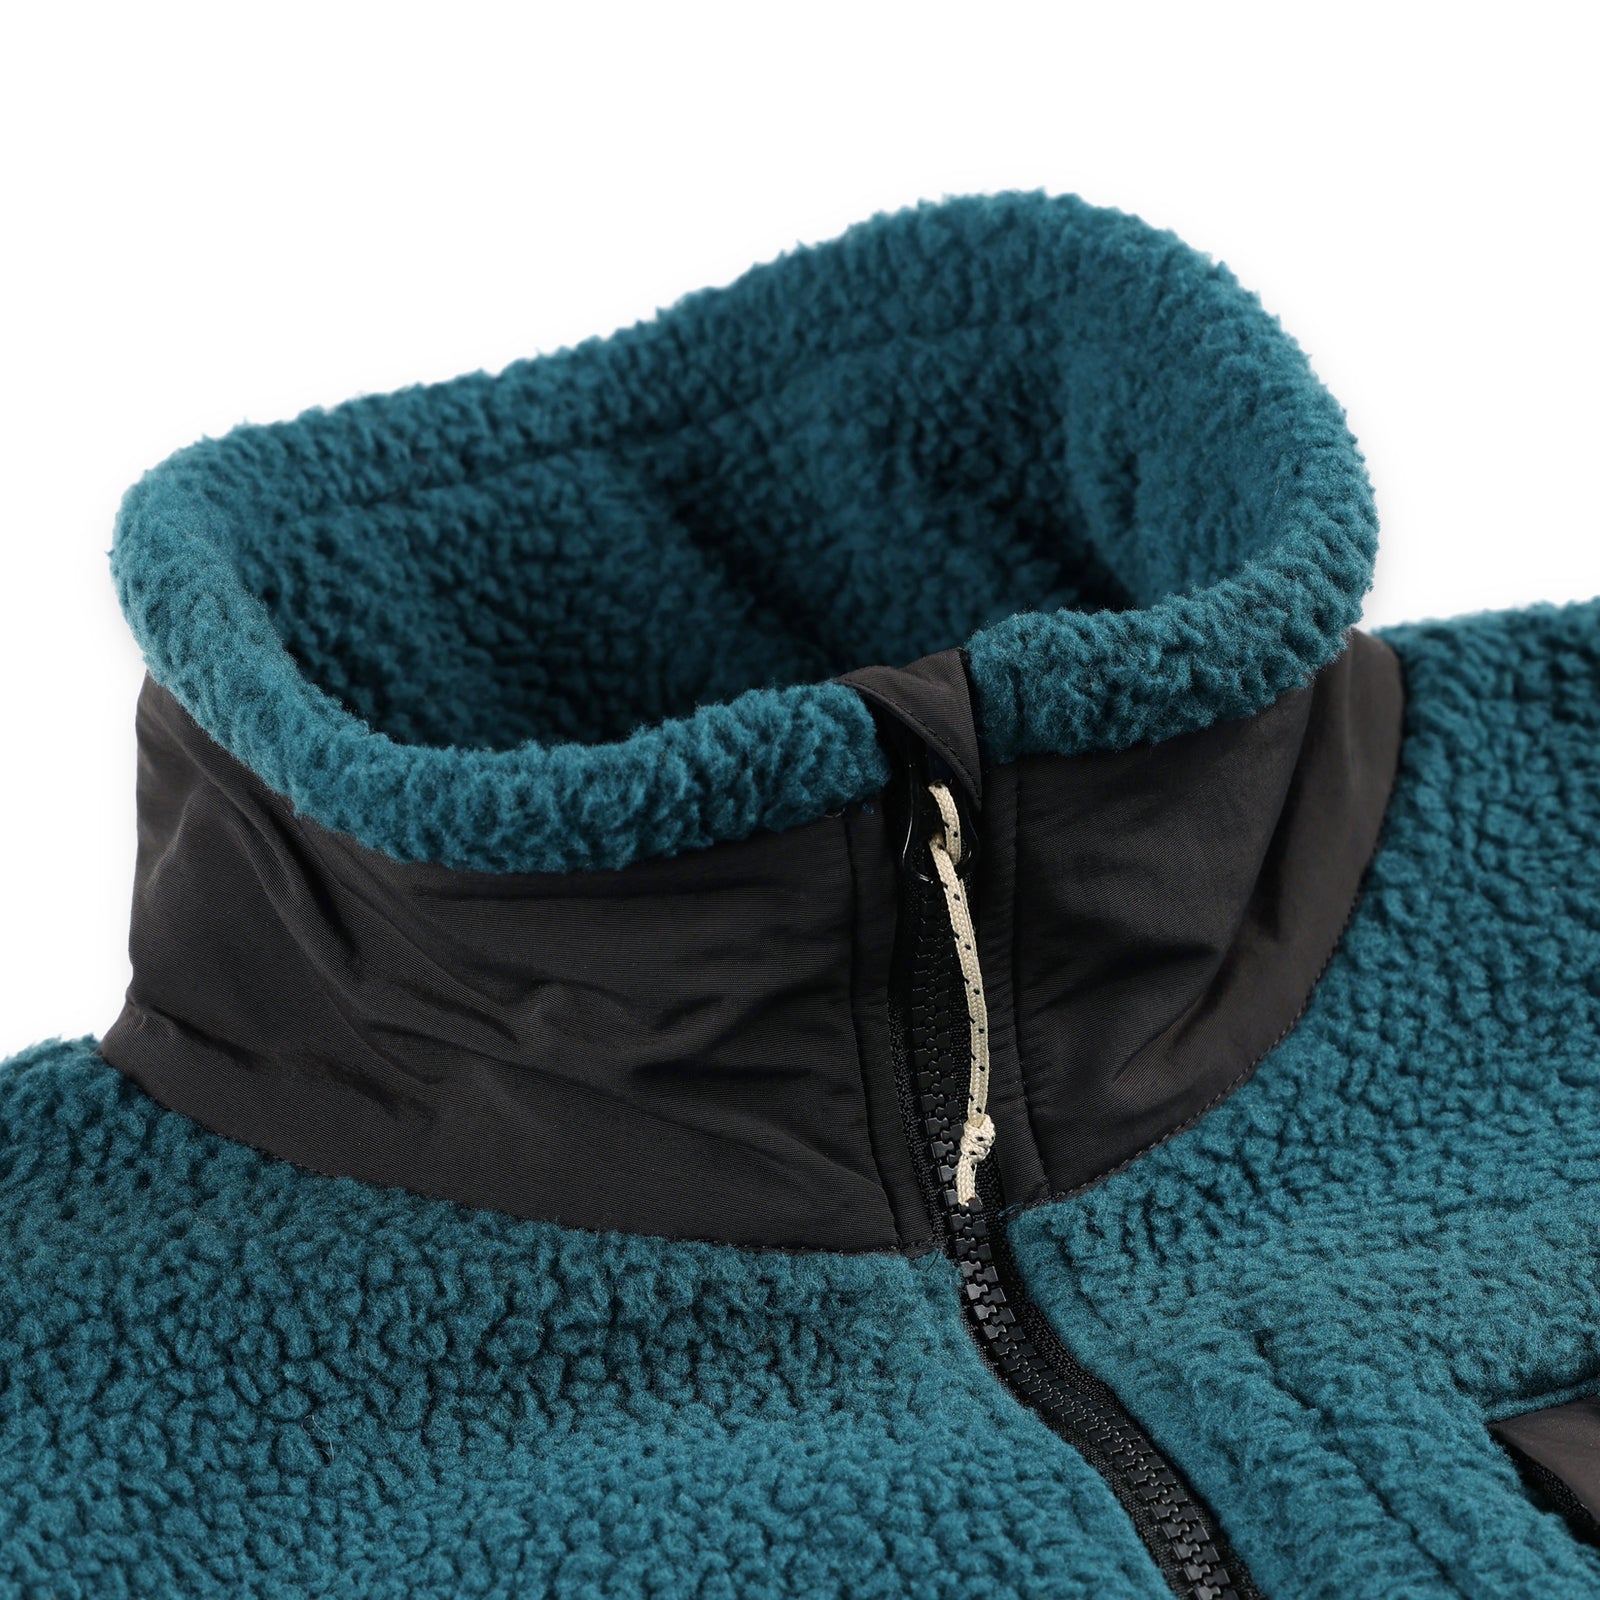 General detail shot of the collar and zipper on Topo Designs Men's Mountain Fleece Pullover in "Pond Blue".